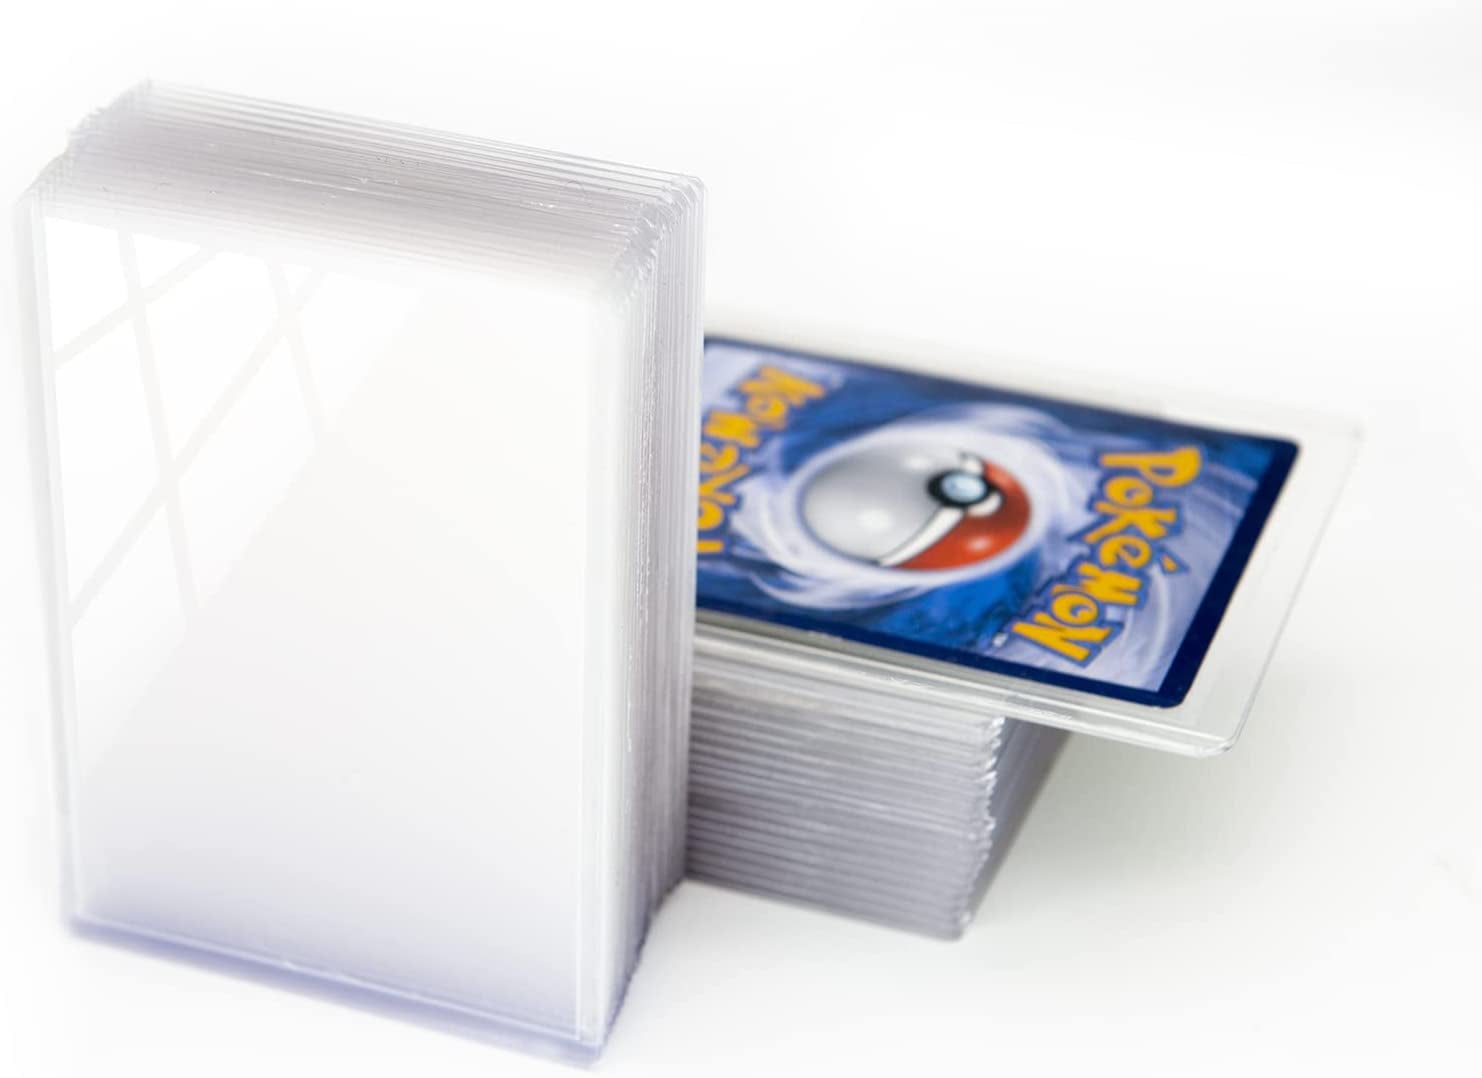 Qesonoo Cards Sleeves Top Loaders 10 Hard Acrylic Card Protector Clear Card  Brick + 2 Display Stand Fit for Trading Cards,Standard Sports Cards,Baseball  Card Holder Cases Collectibles White 10 + 2